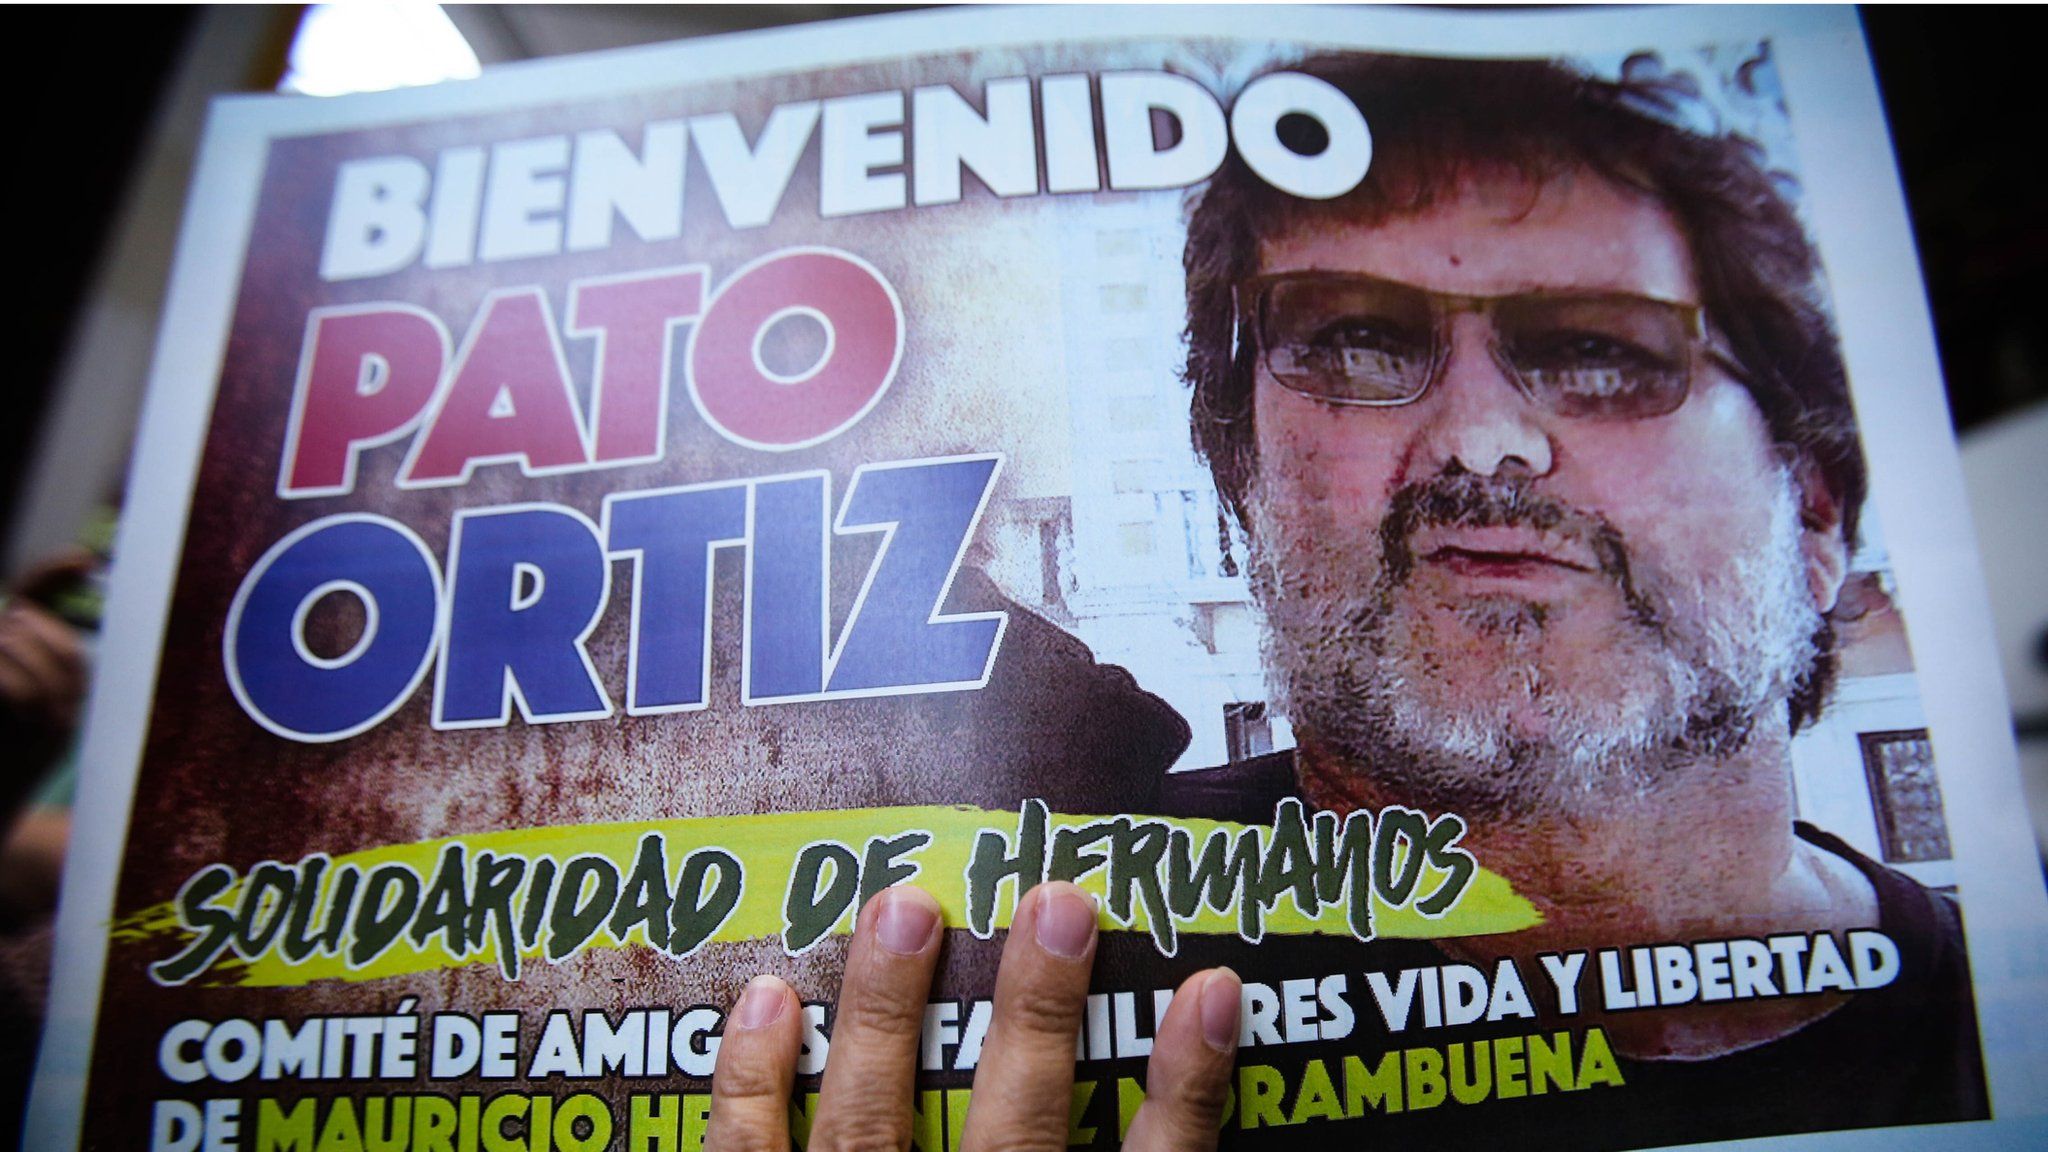 Supporters of Patricio Ortiz Montenegro wave posters upon his arrival to Santiago, Chile, 1 February 2019